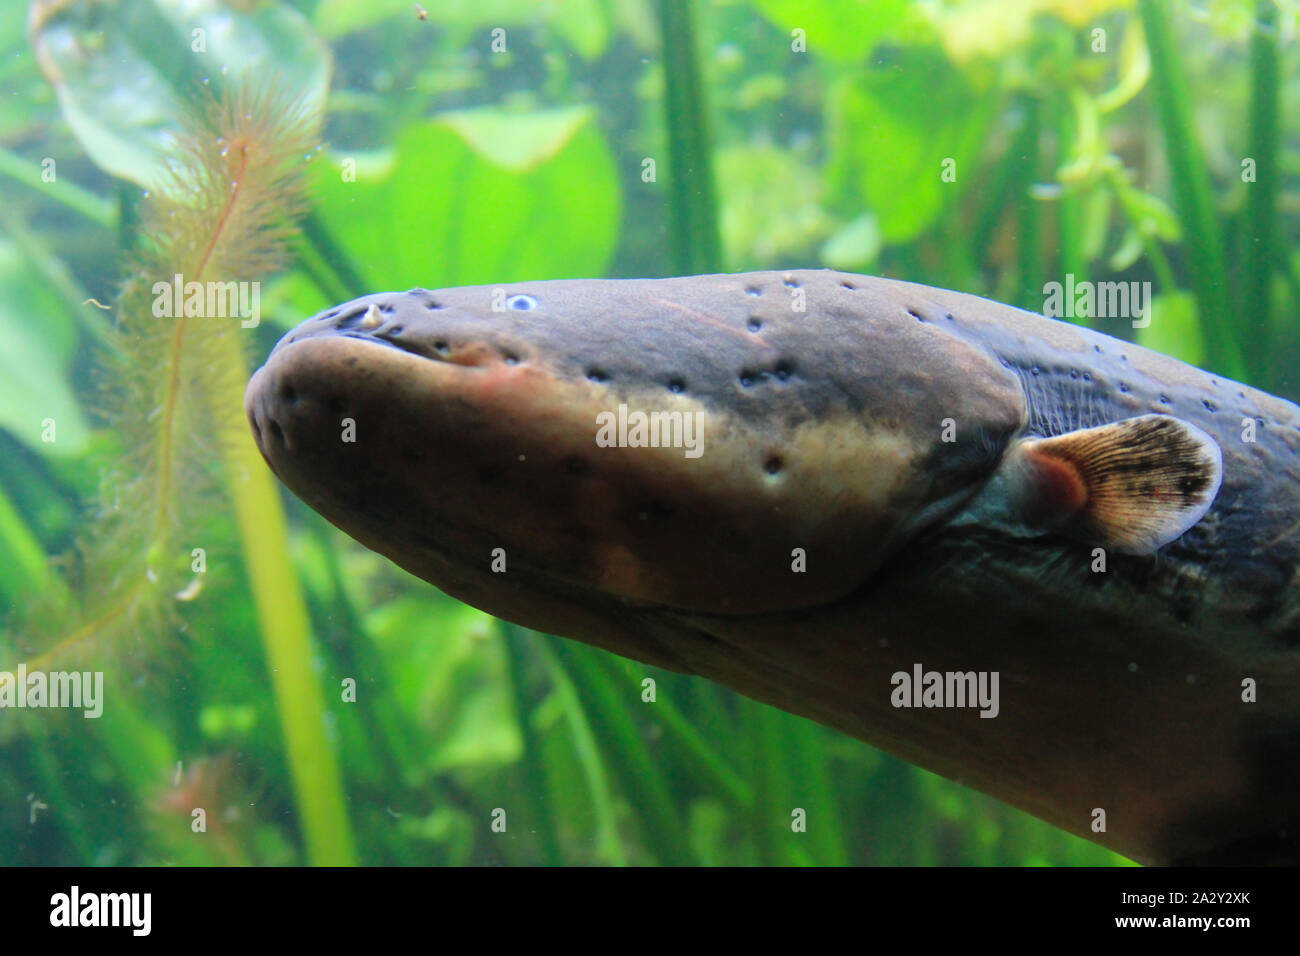 An electric eel in an aquarium with electric transmitters showing. A native of South America it is very dangerous. Stock Photo